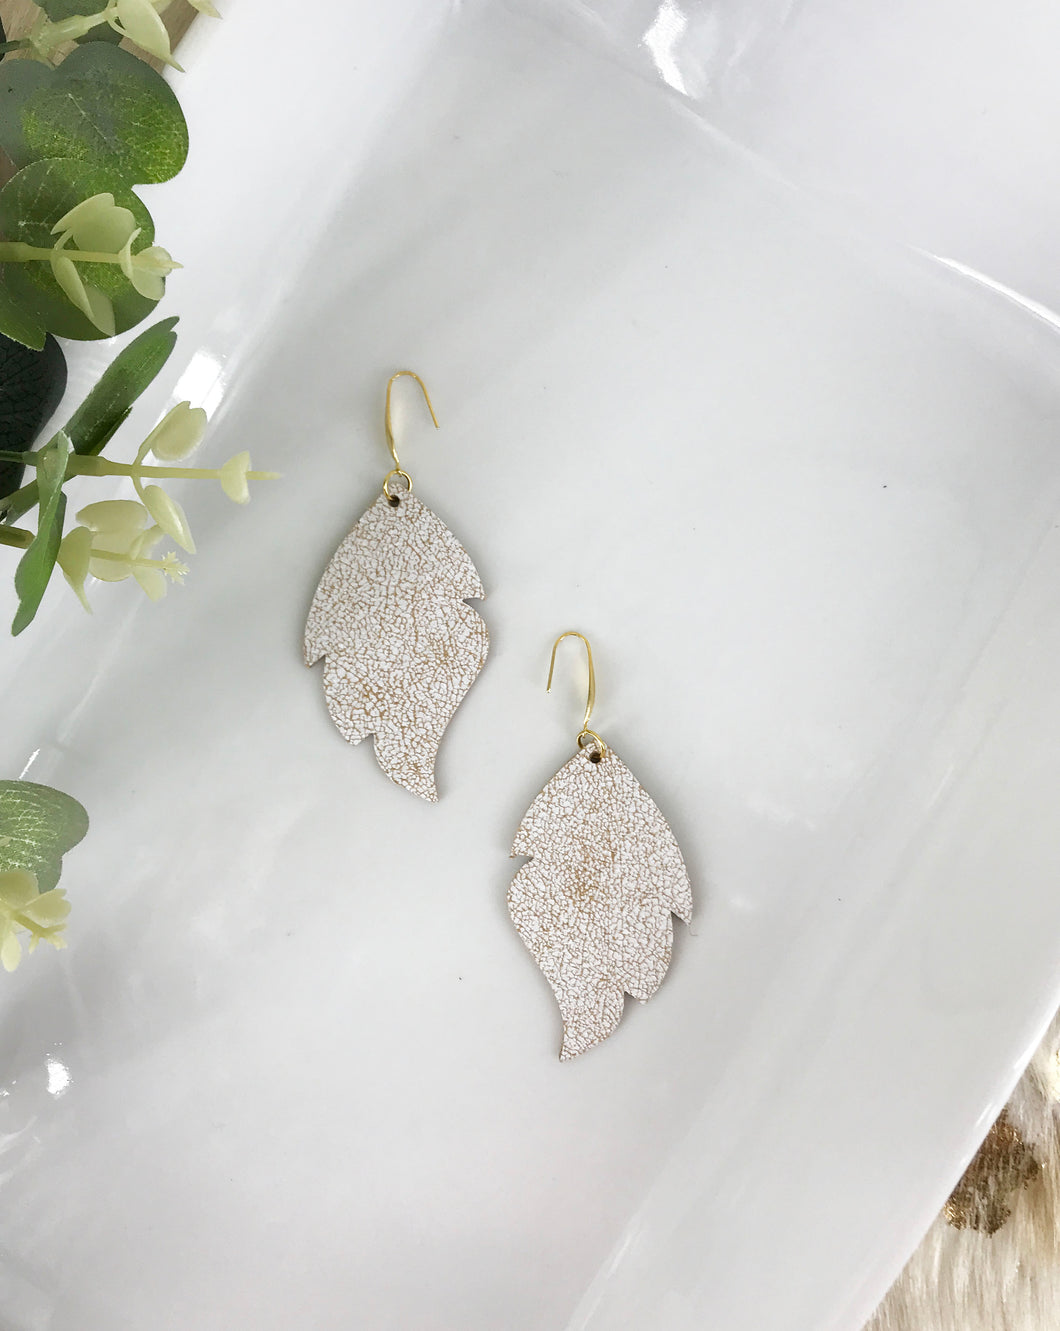 Distressed White Leather Earrings - E19-3523